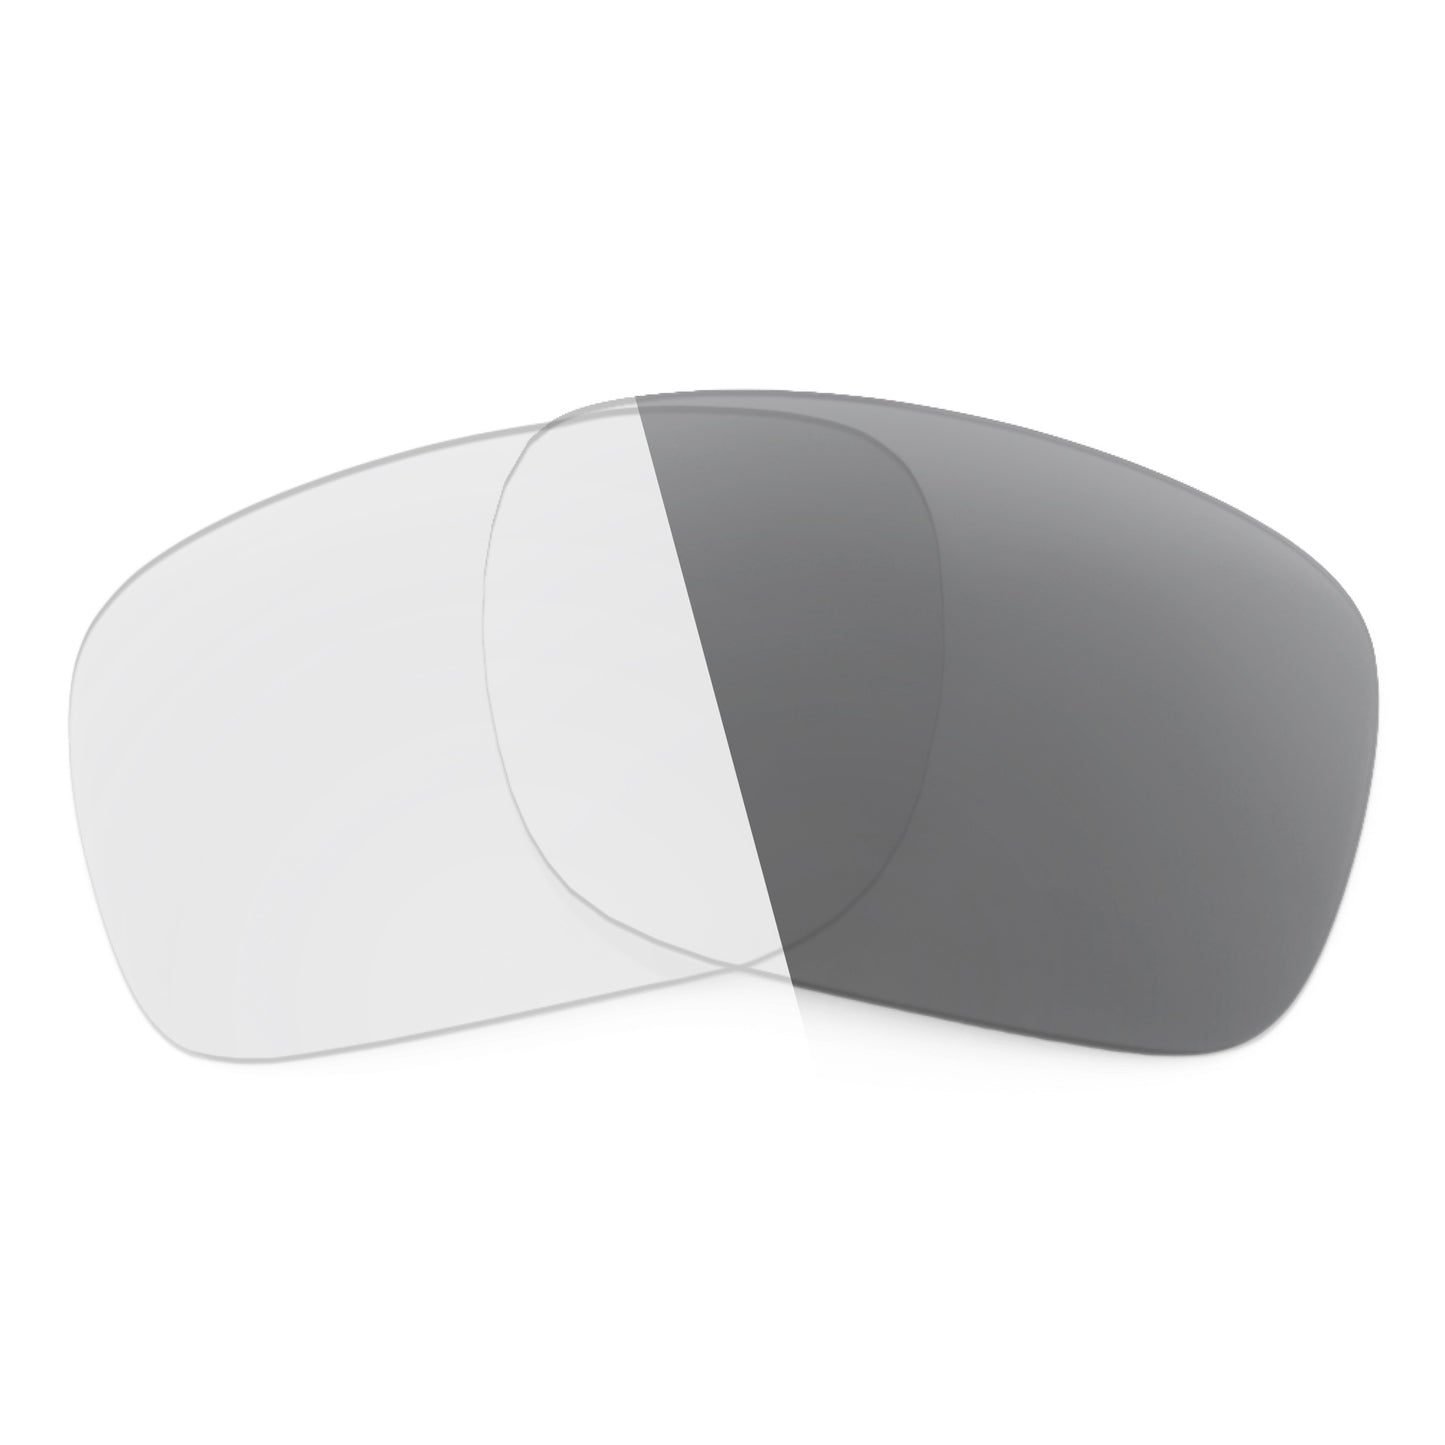 Revant replacement lenses for Ray-Ban RB4226 56mm Non-Polarized Adapt Gray Photochromic